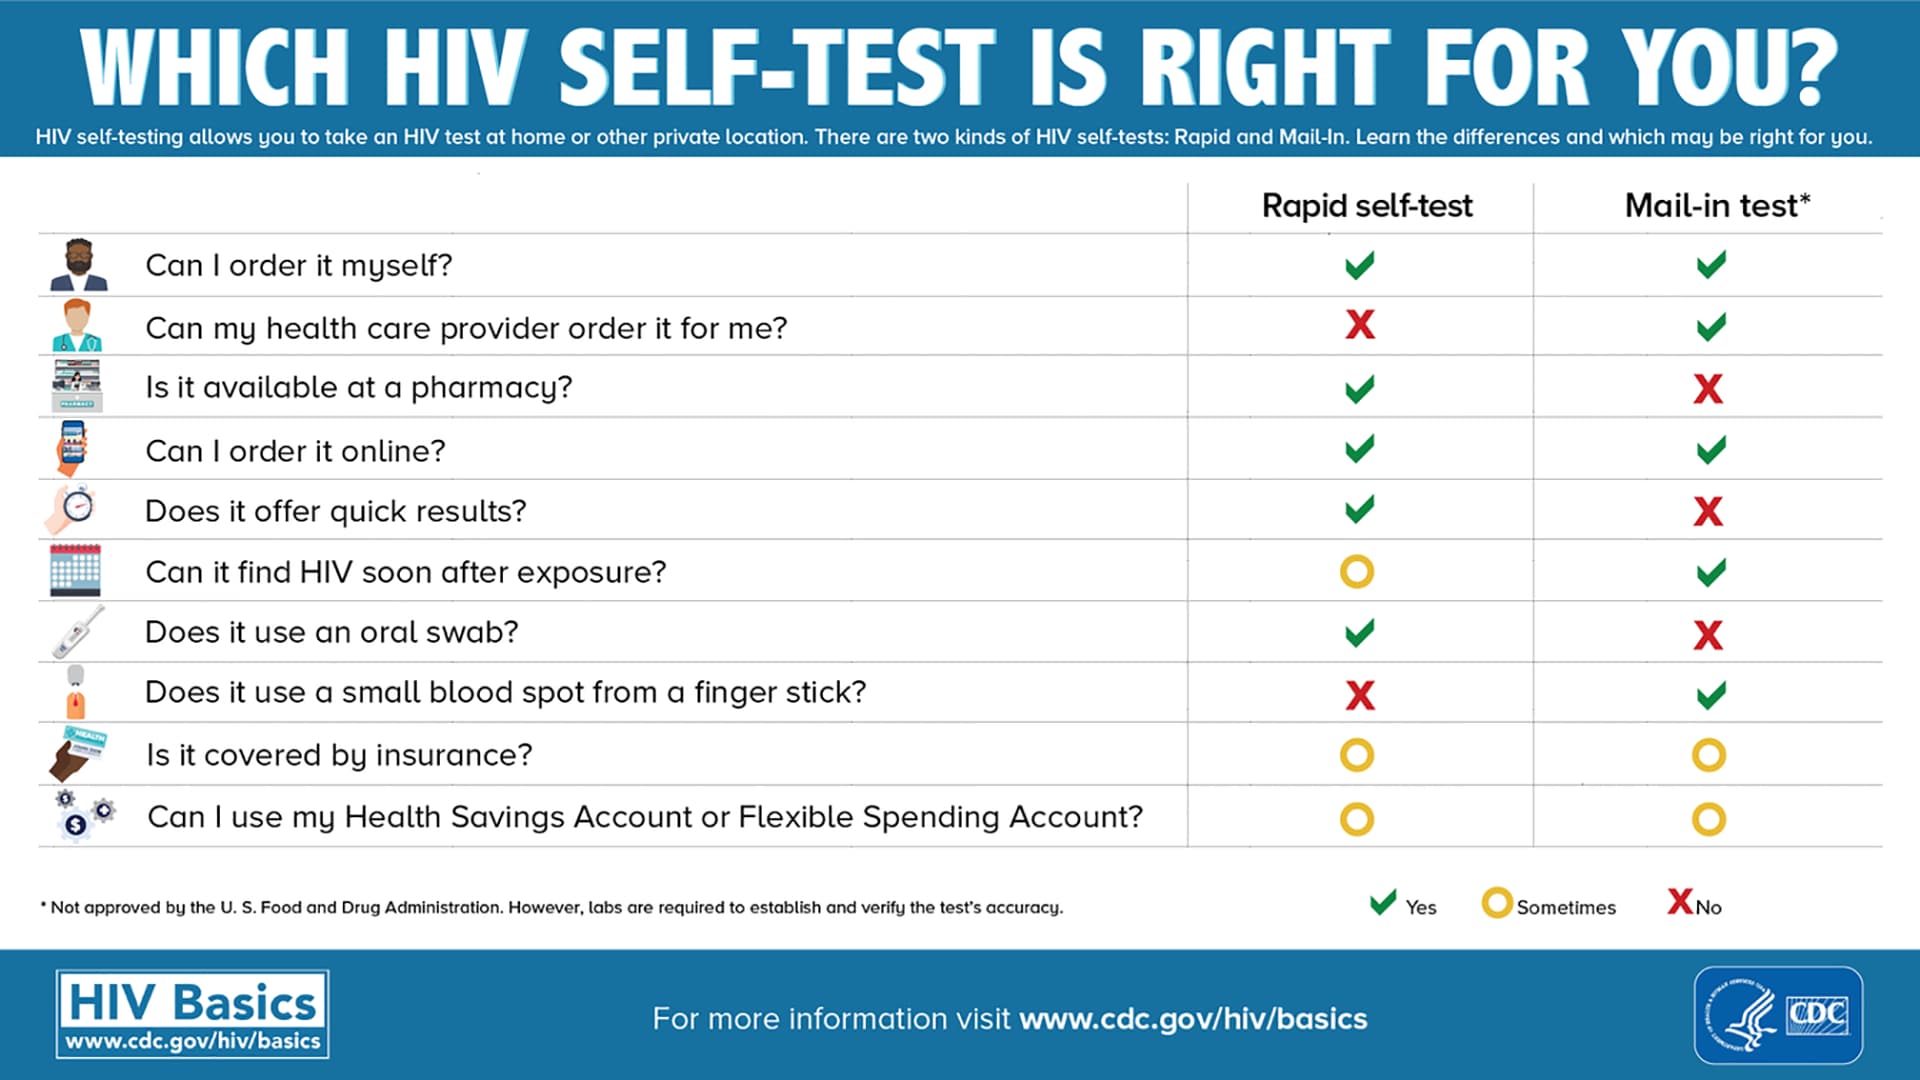 Which HIV self-test is right for you?